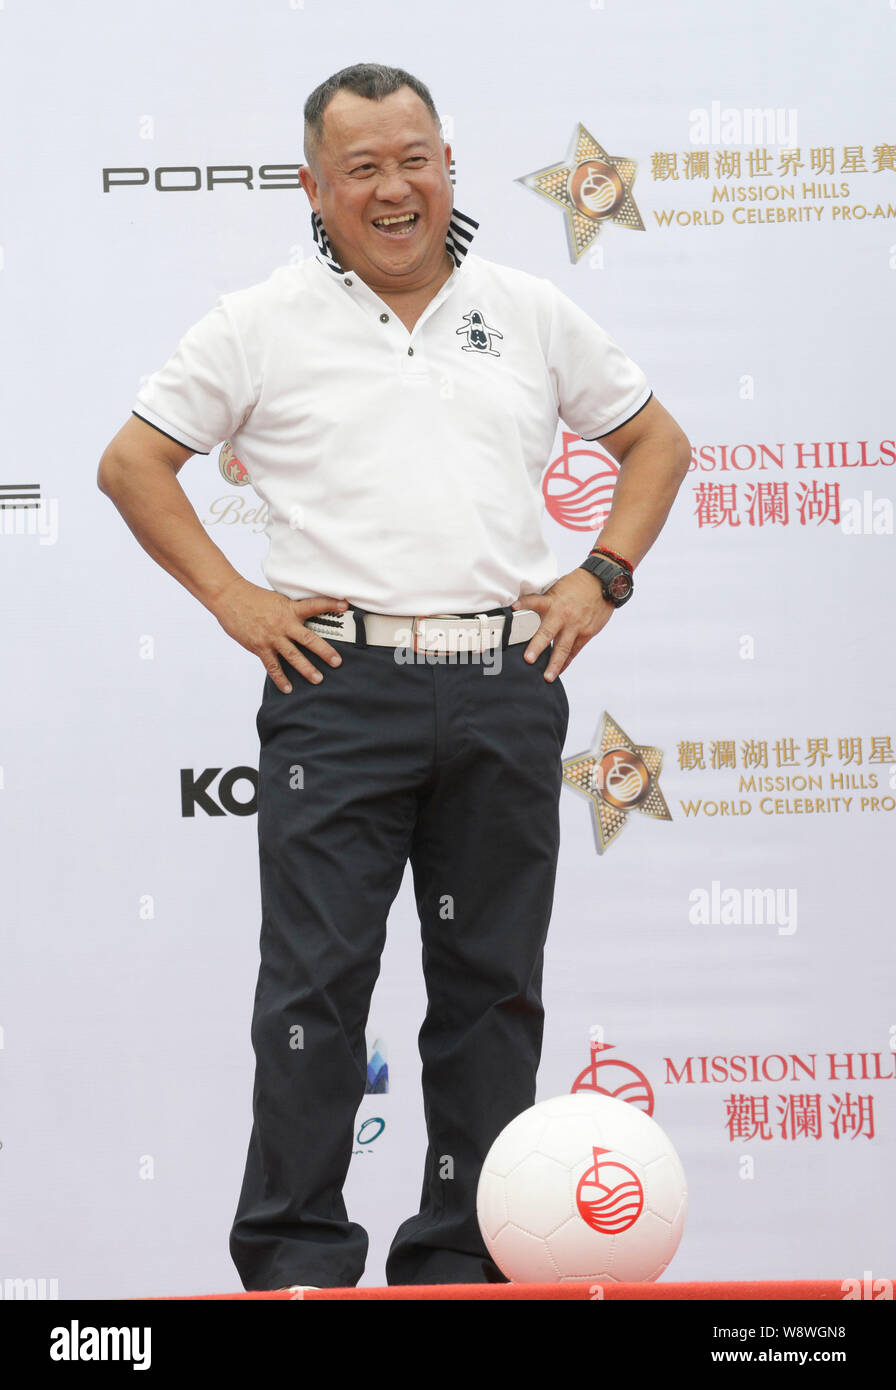 Hong Kong actor Eric Tsang laughs during a press conference for the 2014 Mission Hills World Celebrity Pro-Am in Dongguan city, south Chinas Guangdong Stock Photo